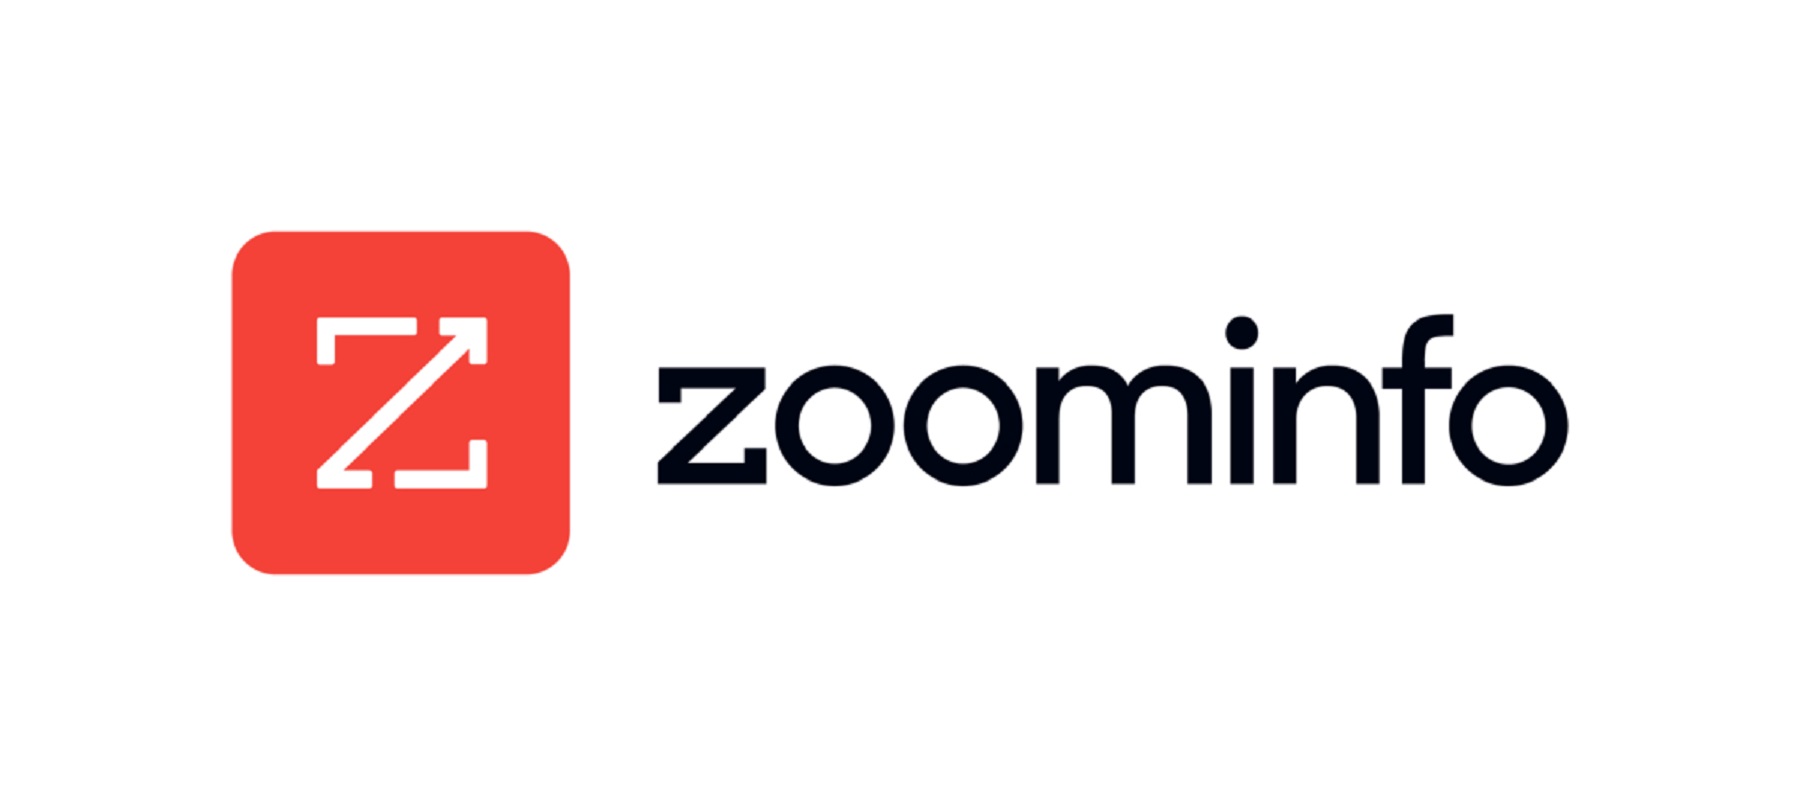 ZoomInfo partners with The Trade Desk to expand digital media buying capabilities